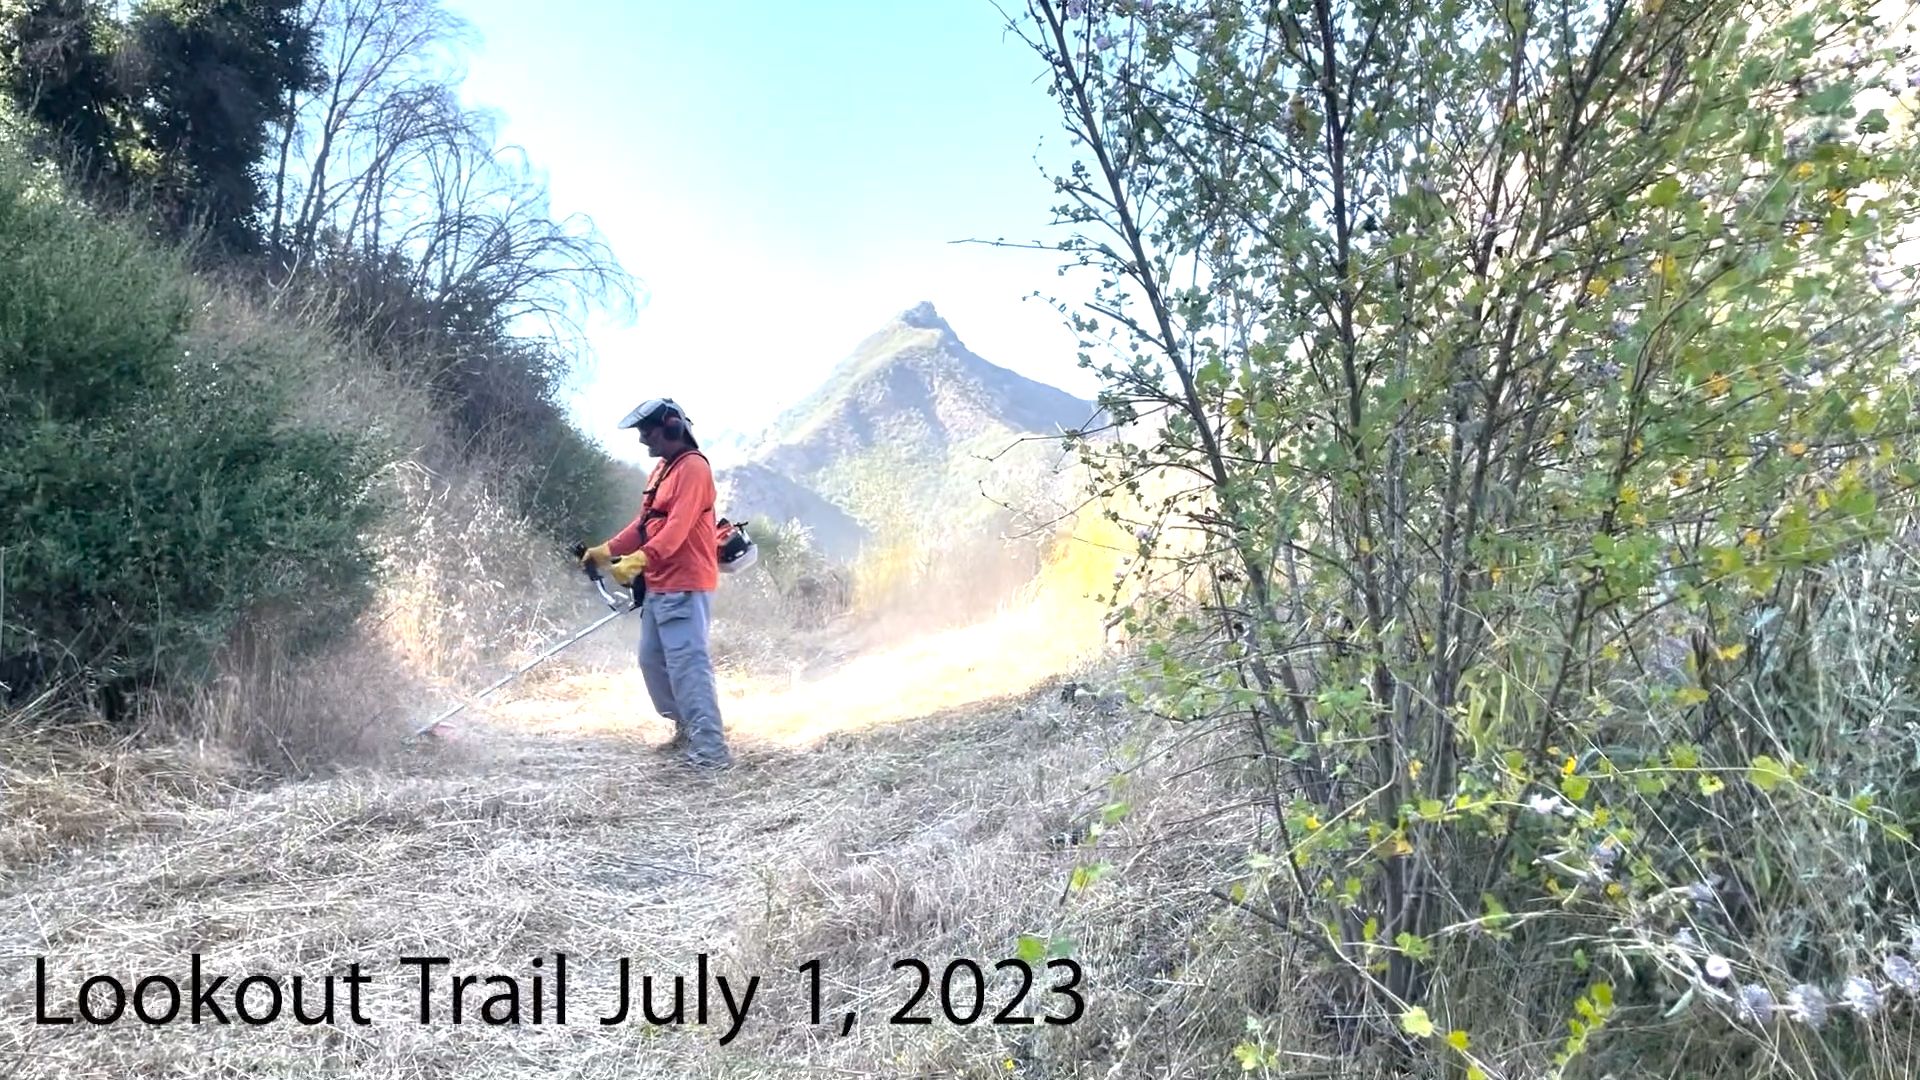 image from our trail work event